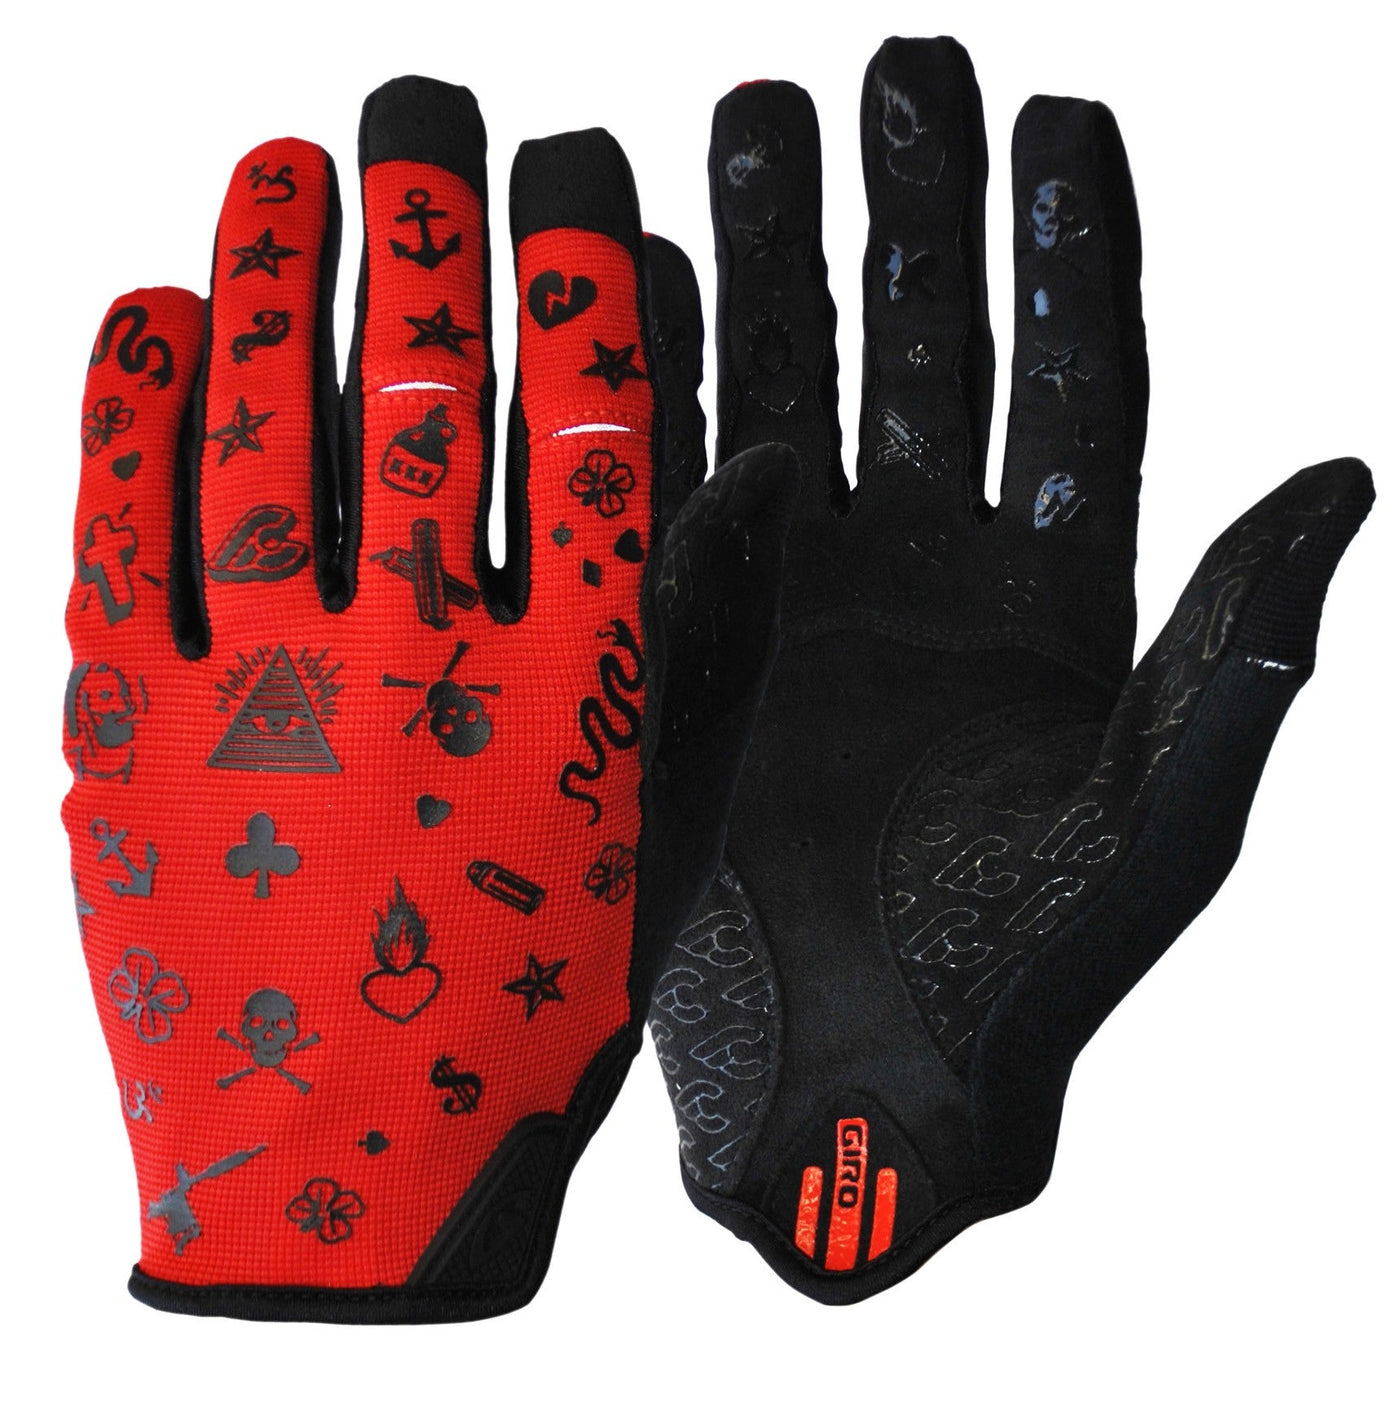 MIKE GIANT RED GIRO DND GLOVES X CINELLI, Gloves, IMG.1